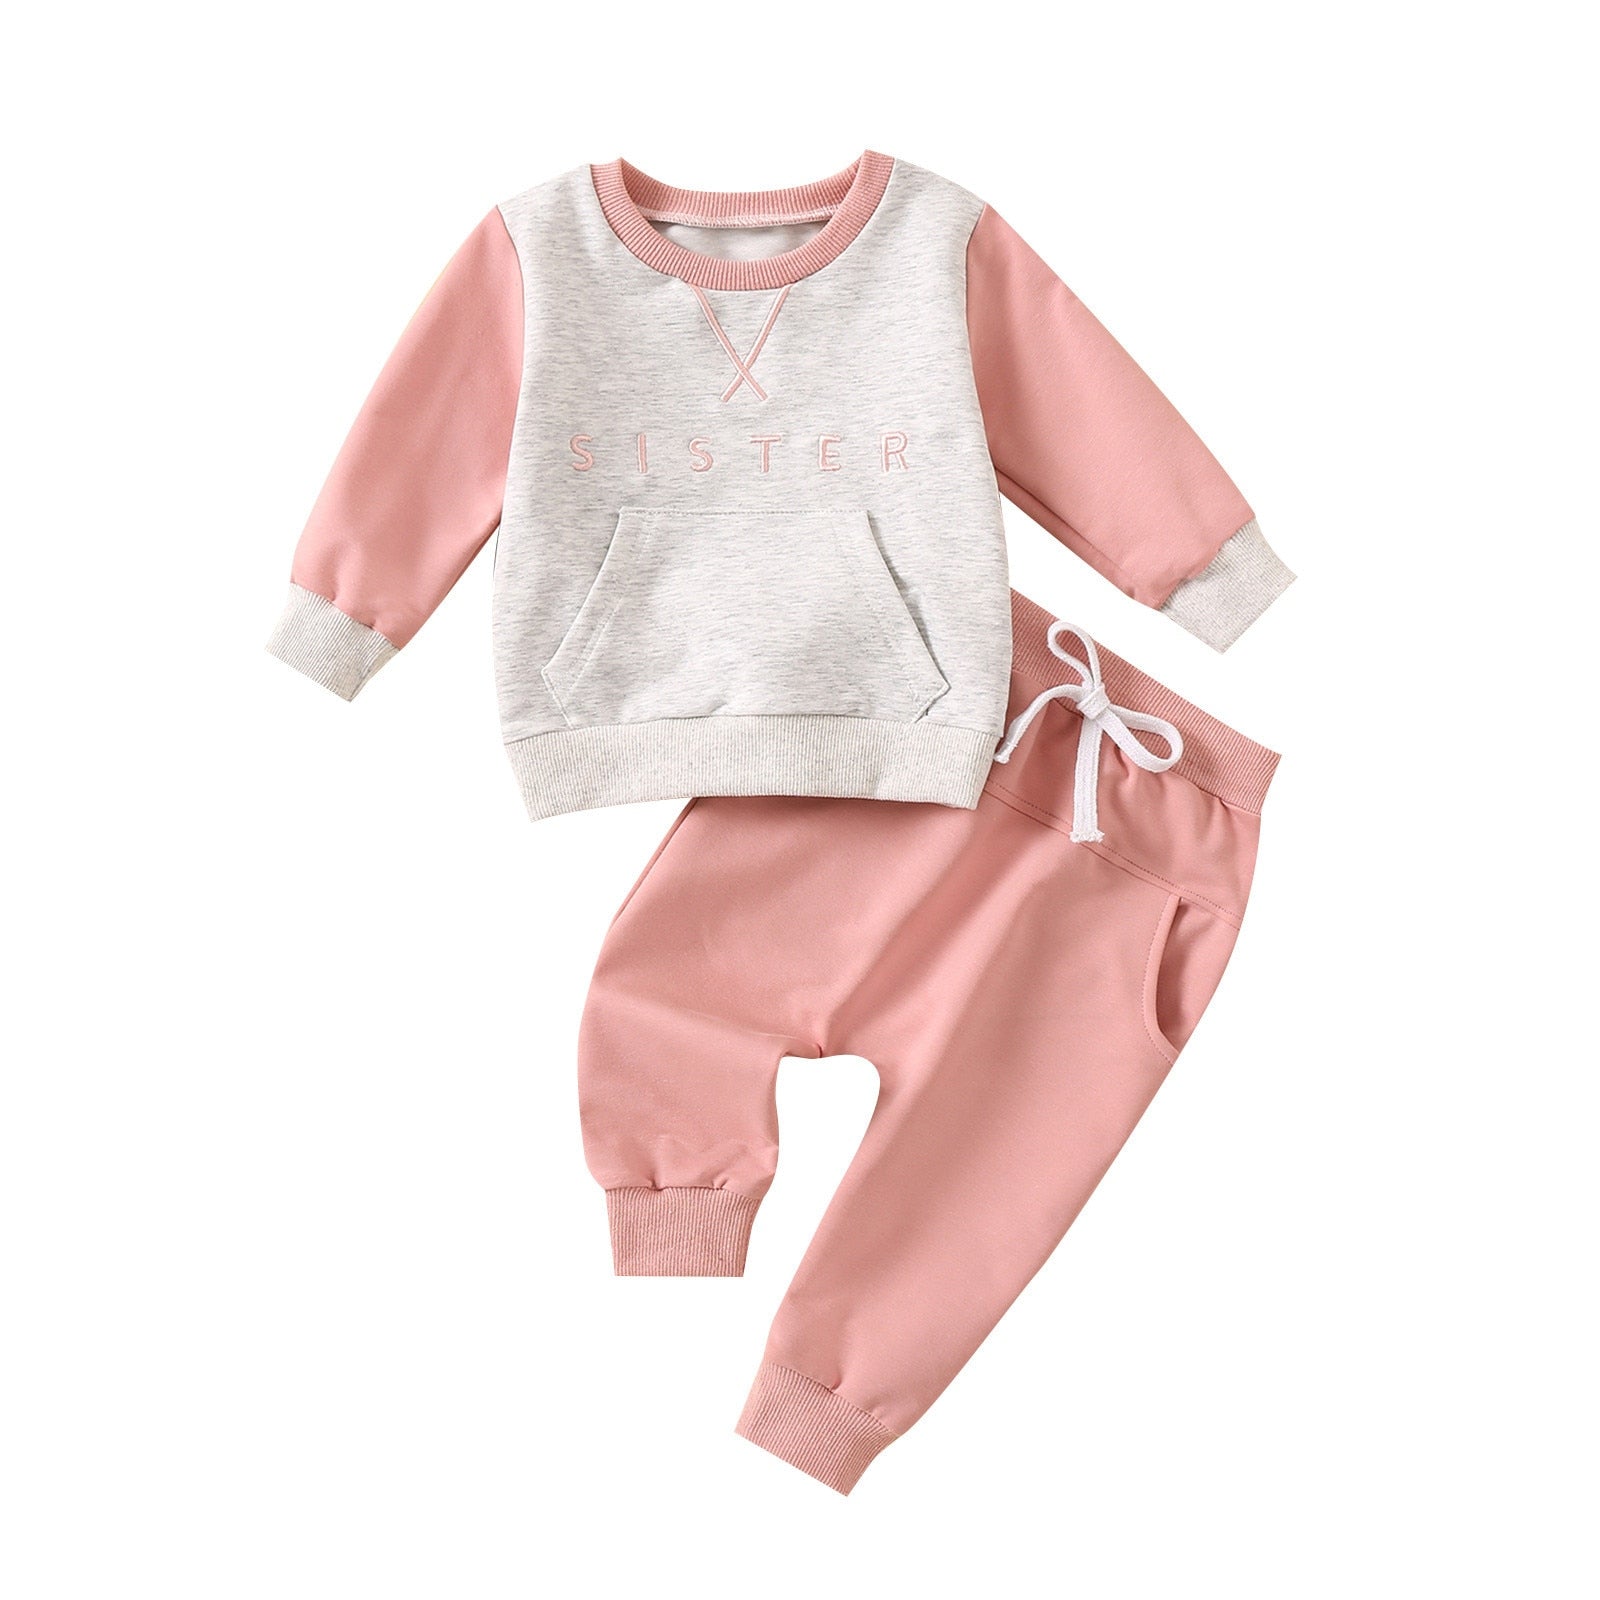 Bank Reversible Jacket Newborn Infant Baby Unisex Cotton letter outfit for girls